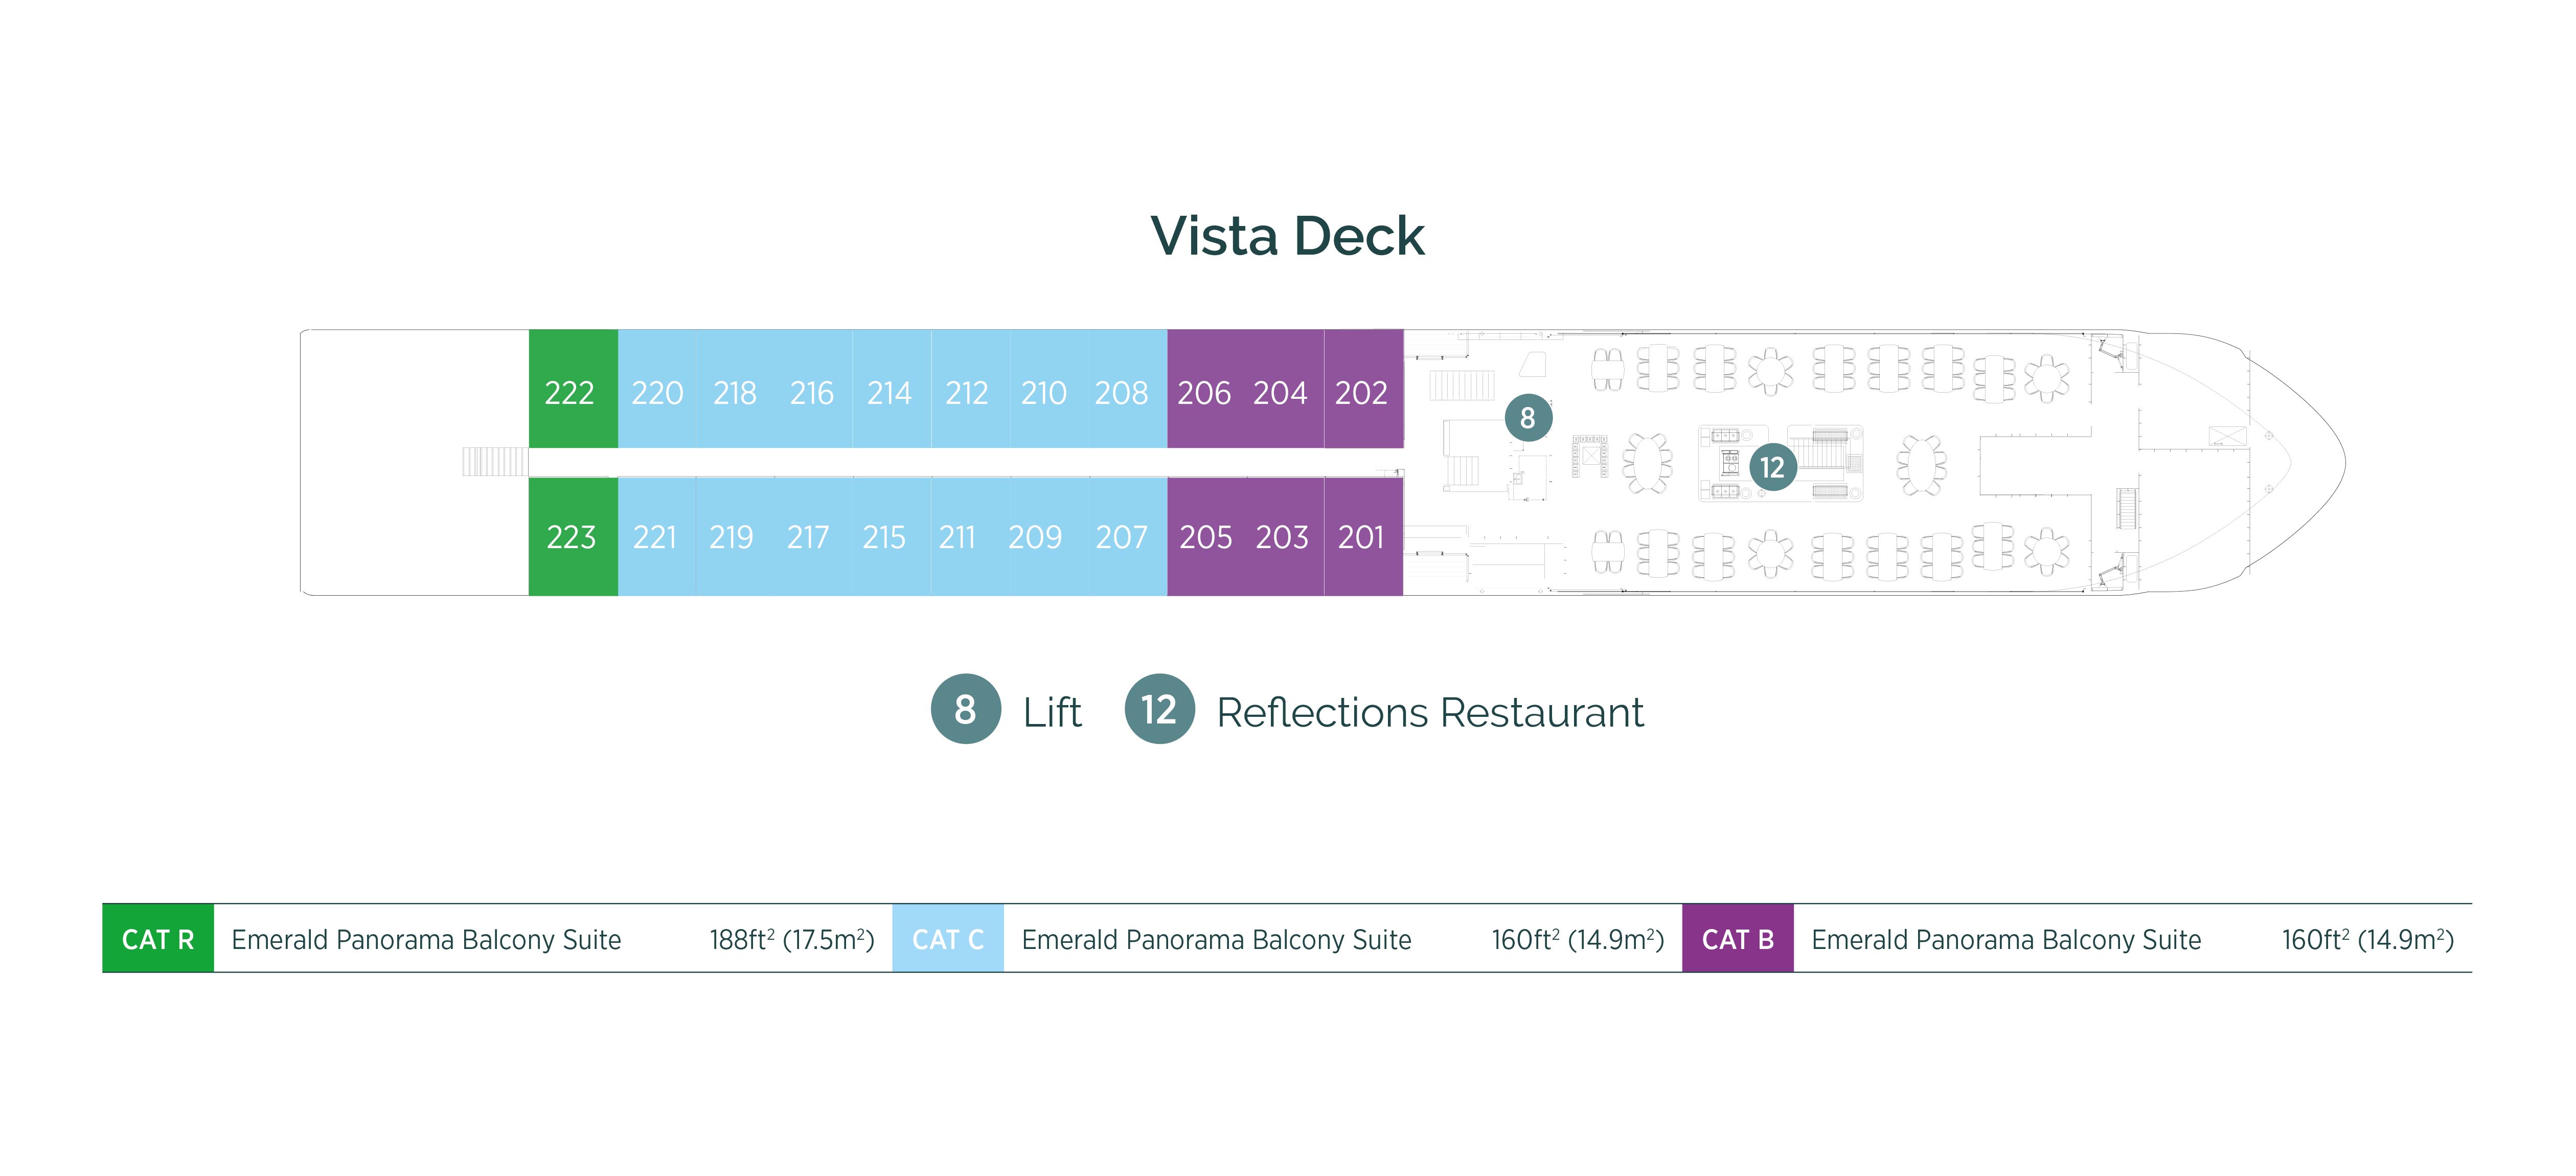 Diagram of ship layout for the Vista Deck of Emerald Cruises’ Douro river cruising Star-Ship, Emerald Radiance